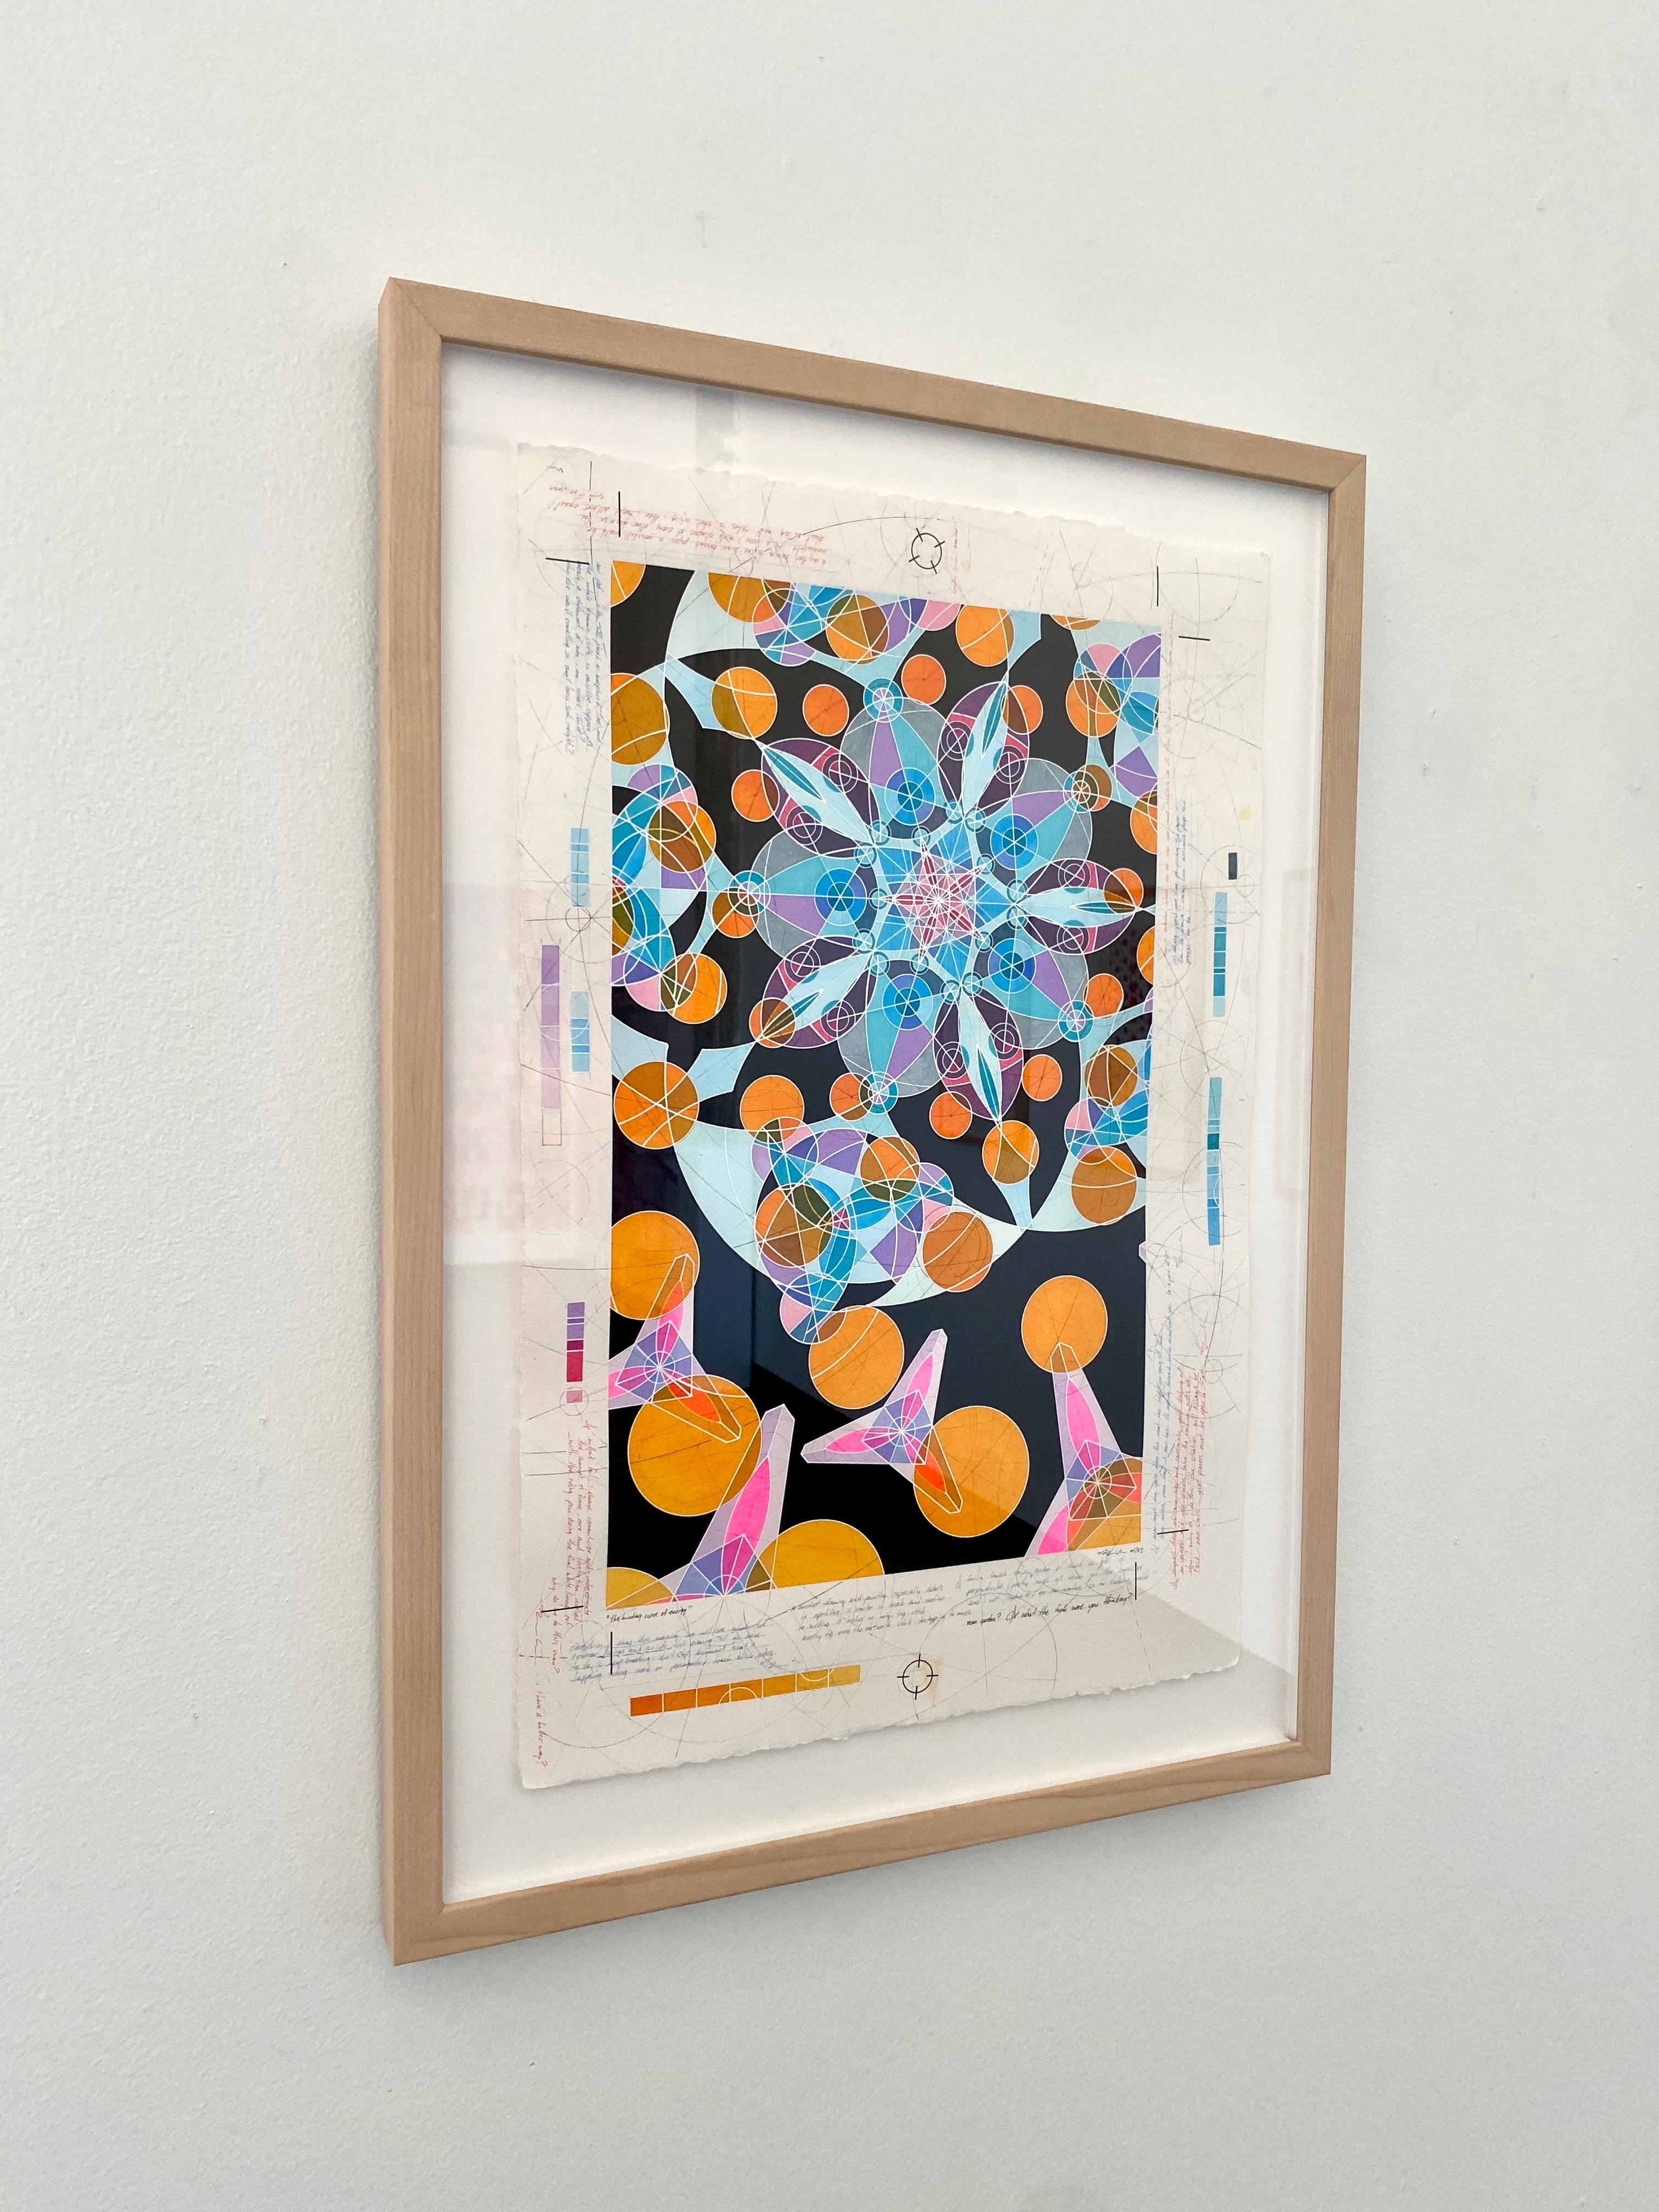 Binding Curve of Energy, Contemporary Ink on Paper, Geometric Abstract, Framed - Art by Brian Daly